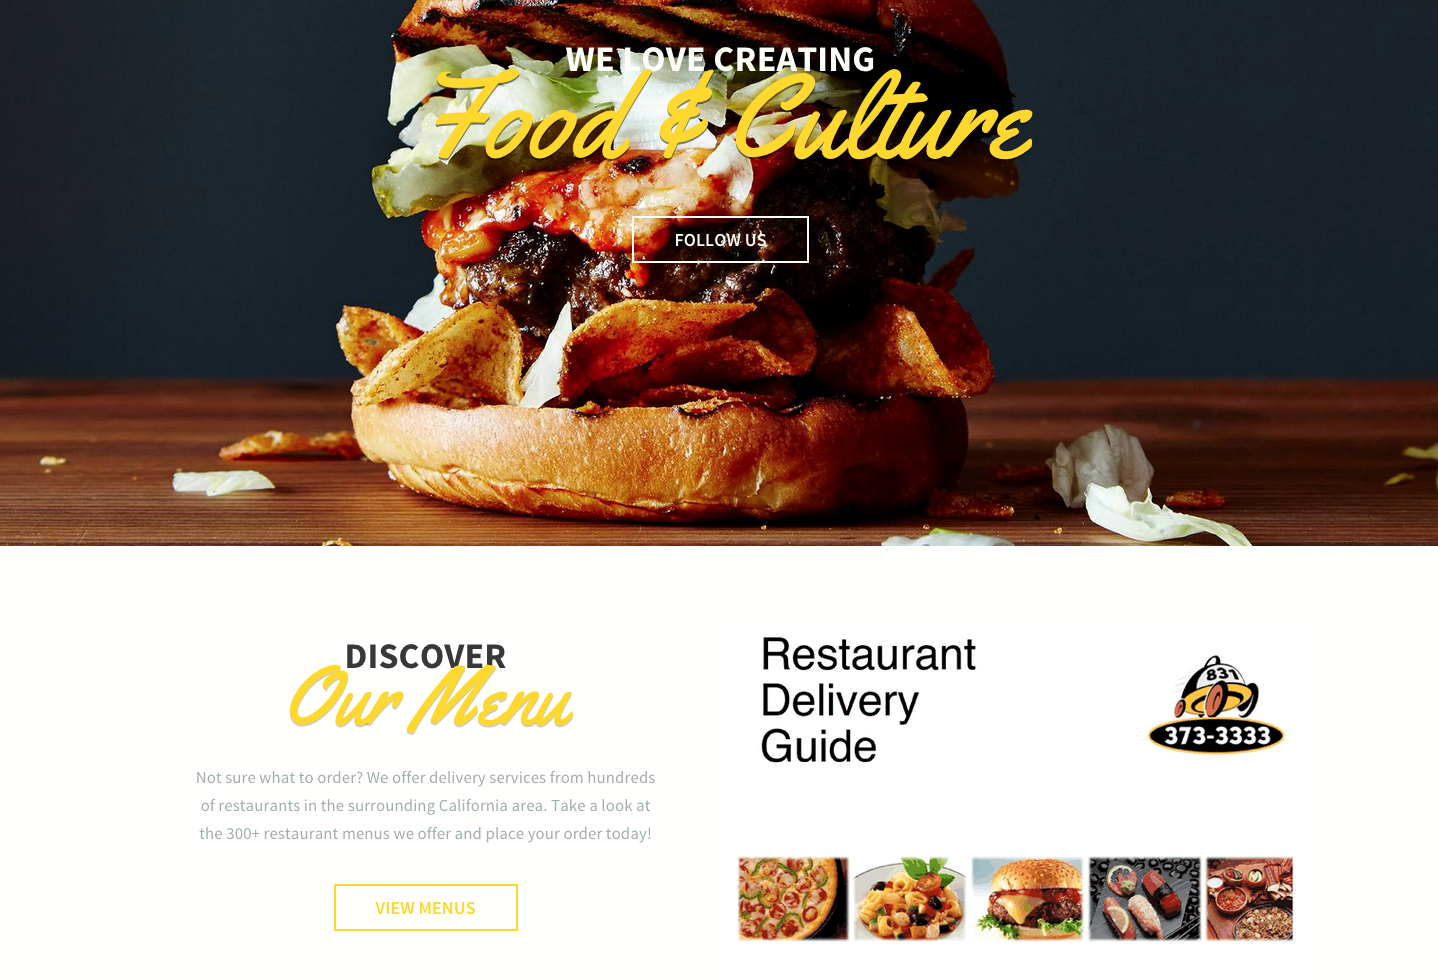 Promote your restaurant menu on Facebook using LeadPages